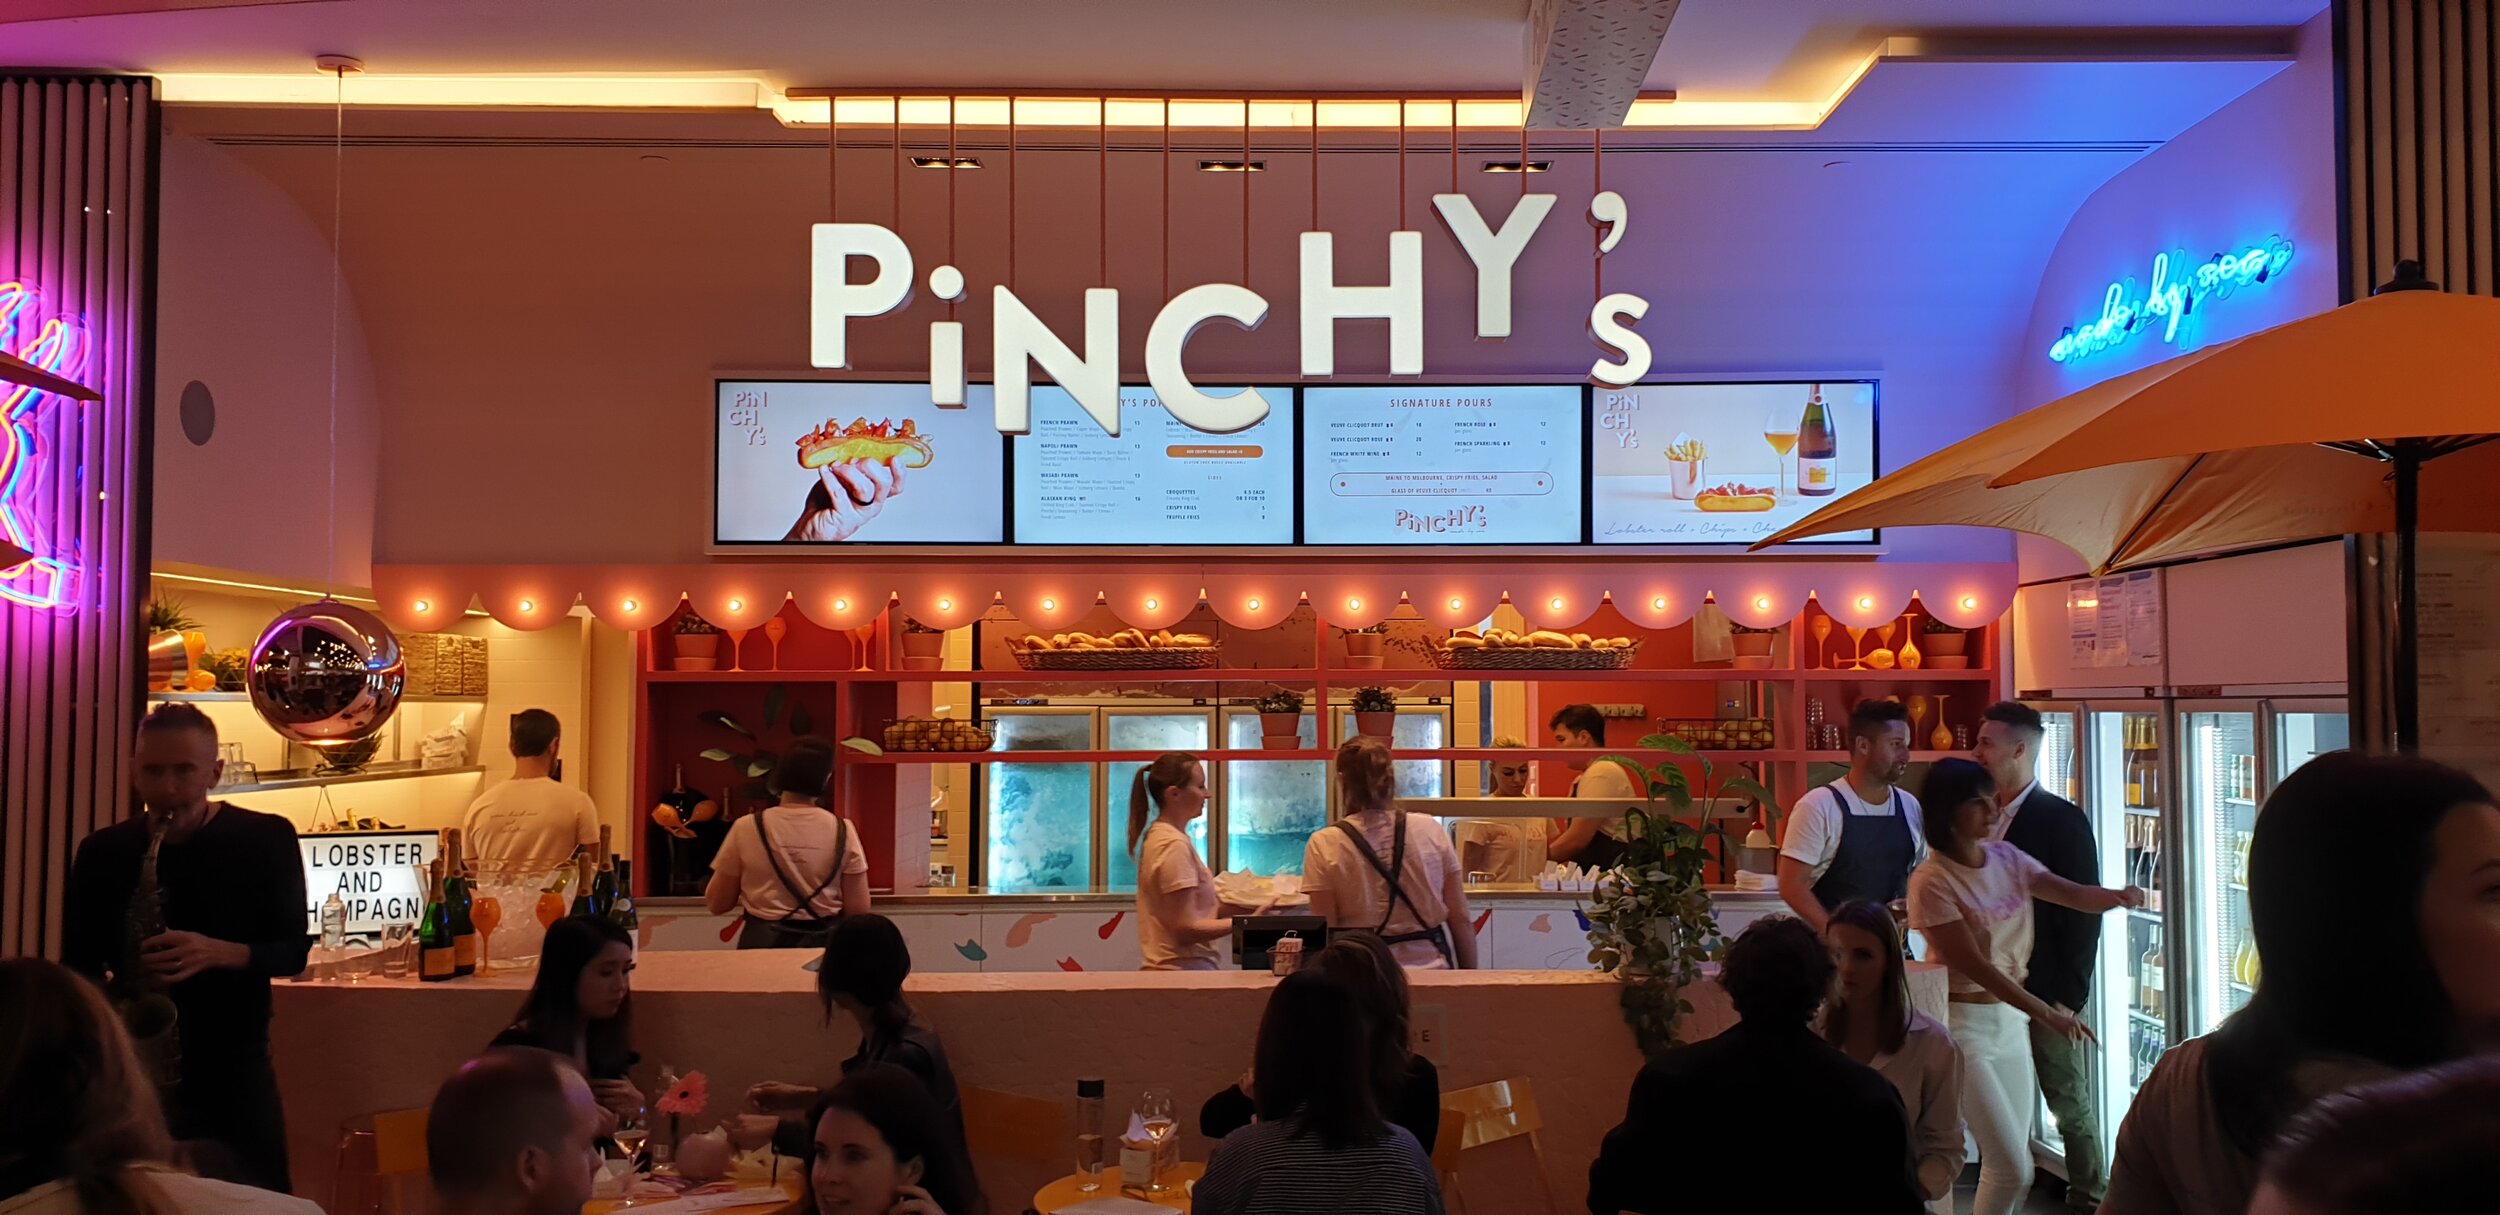 PINCHY'S — MADE BY SEA